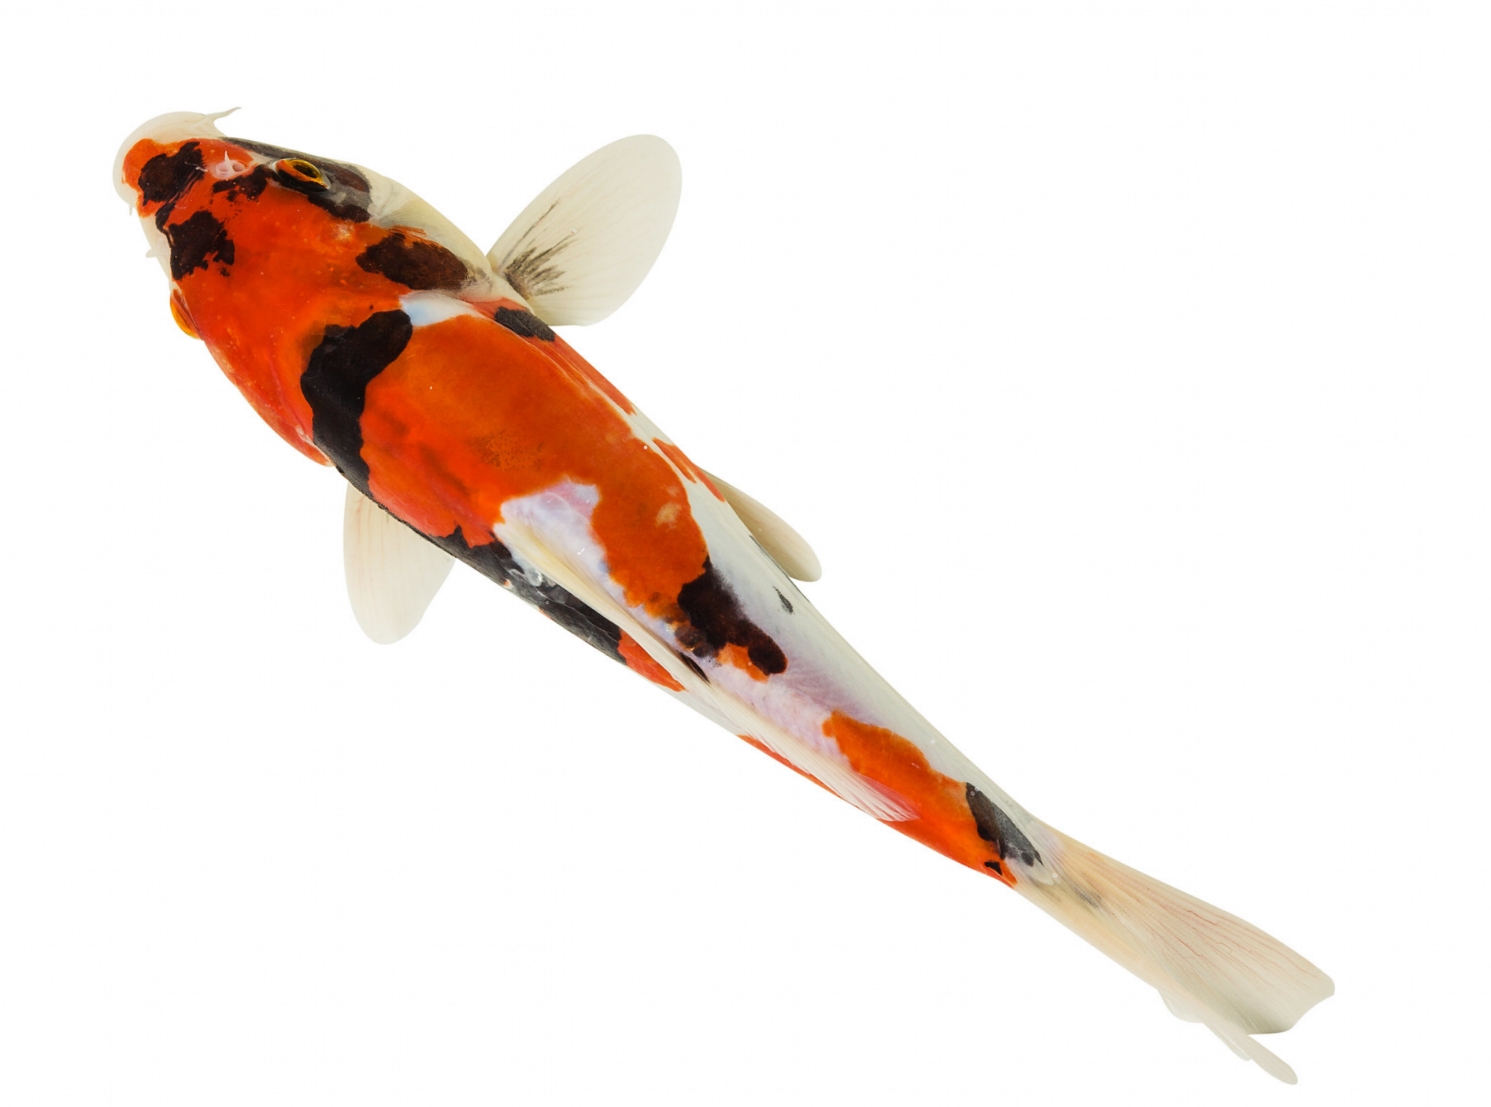 Koi Fish Color Meaning Chart